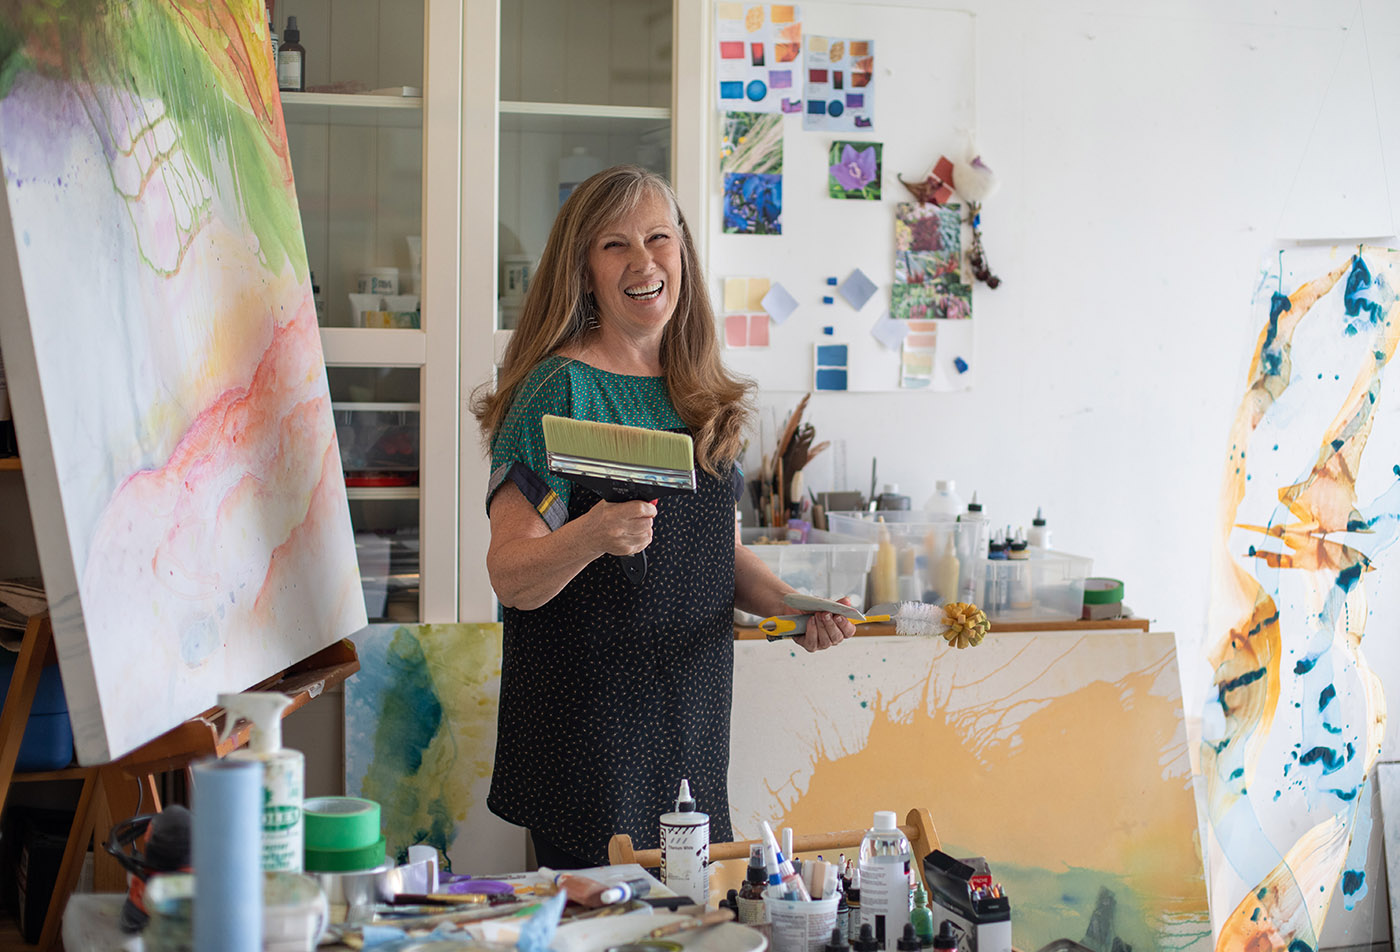 Jan Jensen holding a large paint brush and smiling in her studio 